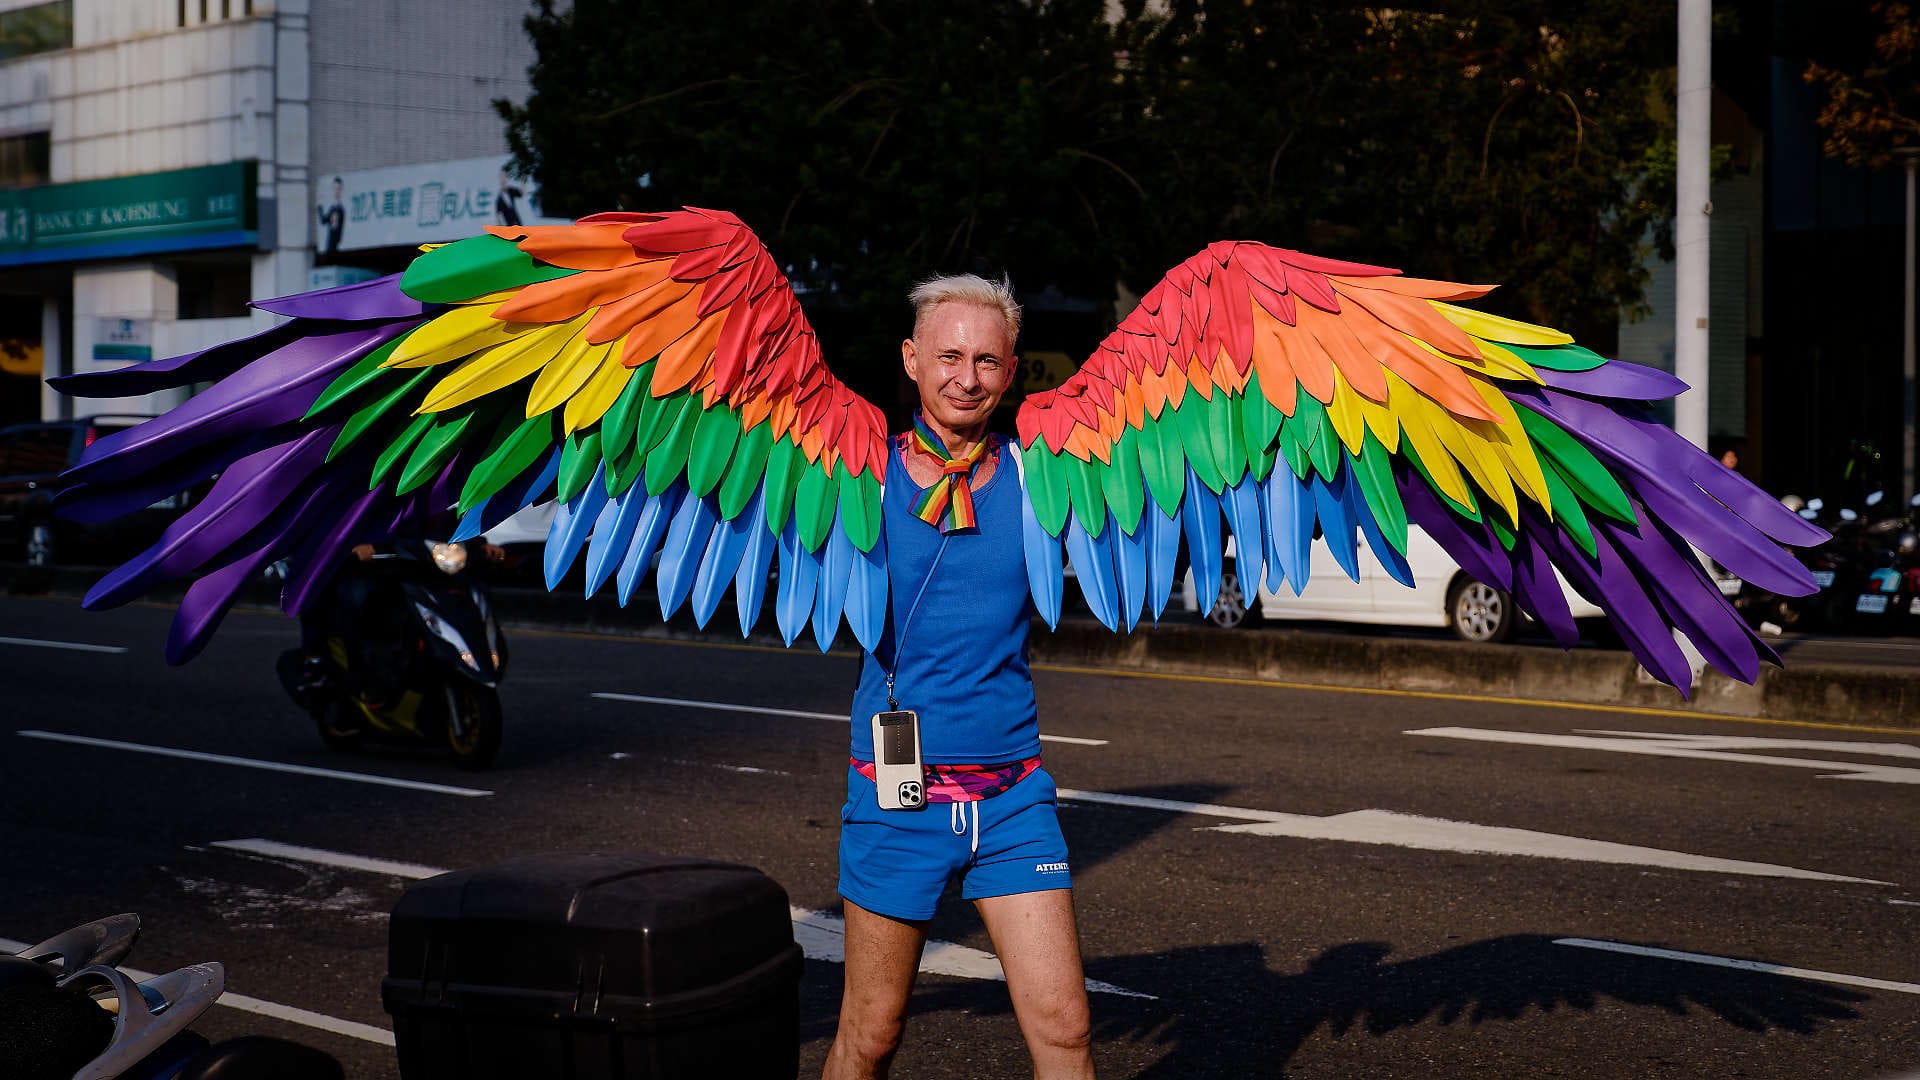 Person wearing colorful outstretched feathered wings.